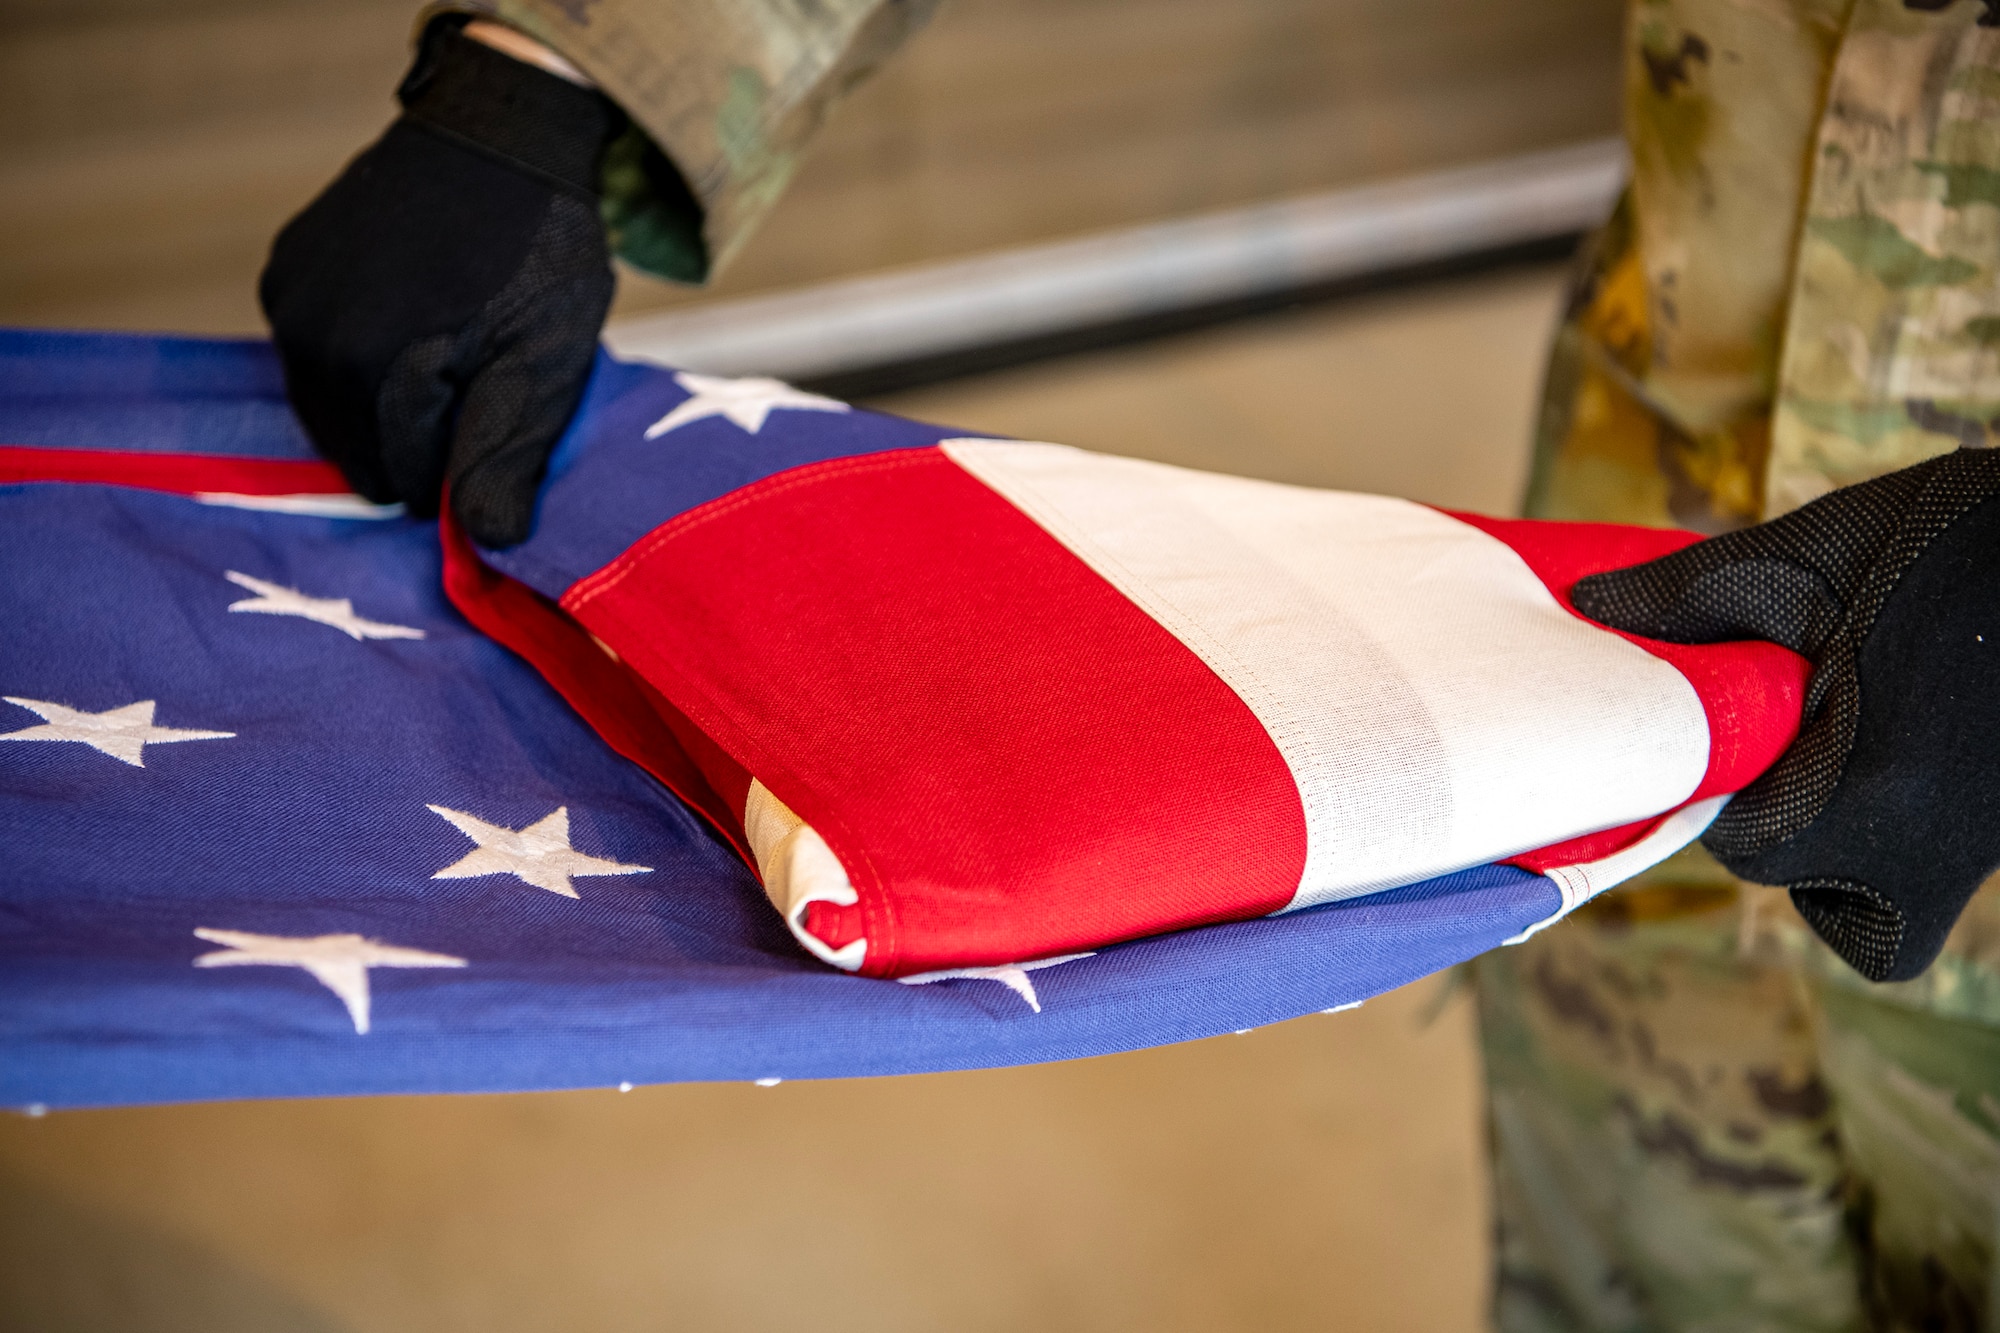 An Airman from the 423d Air Base Group Honor Guard folds a flag during training at RAF Alconbury, England, April 21, 2023. In order to become HG members, Airmen must complete rigorous initial training to ensure they are qualified to render military honors. (U.S. Air Force photo by Staff Sgt. Eugene Oliver)